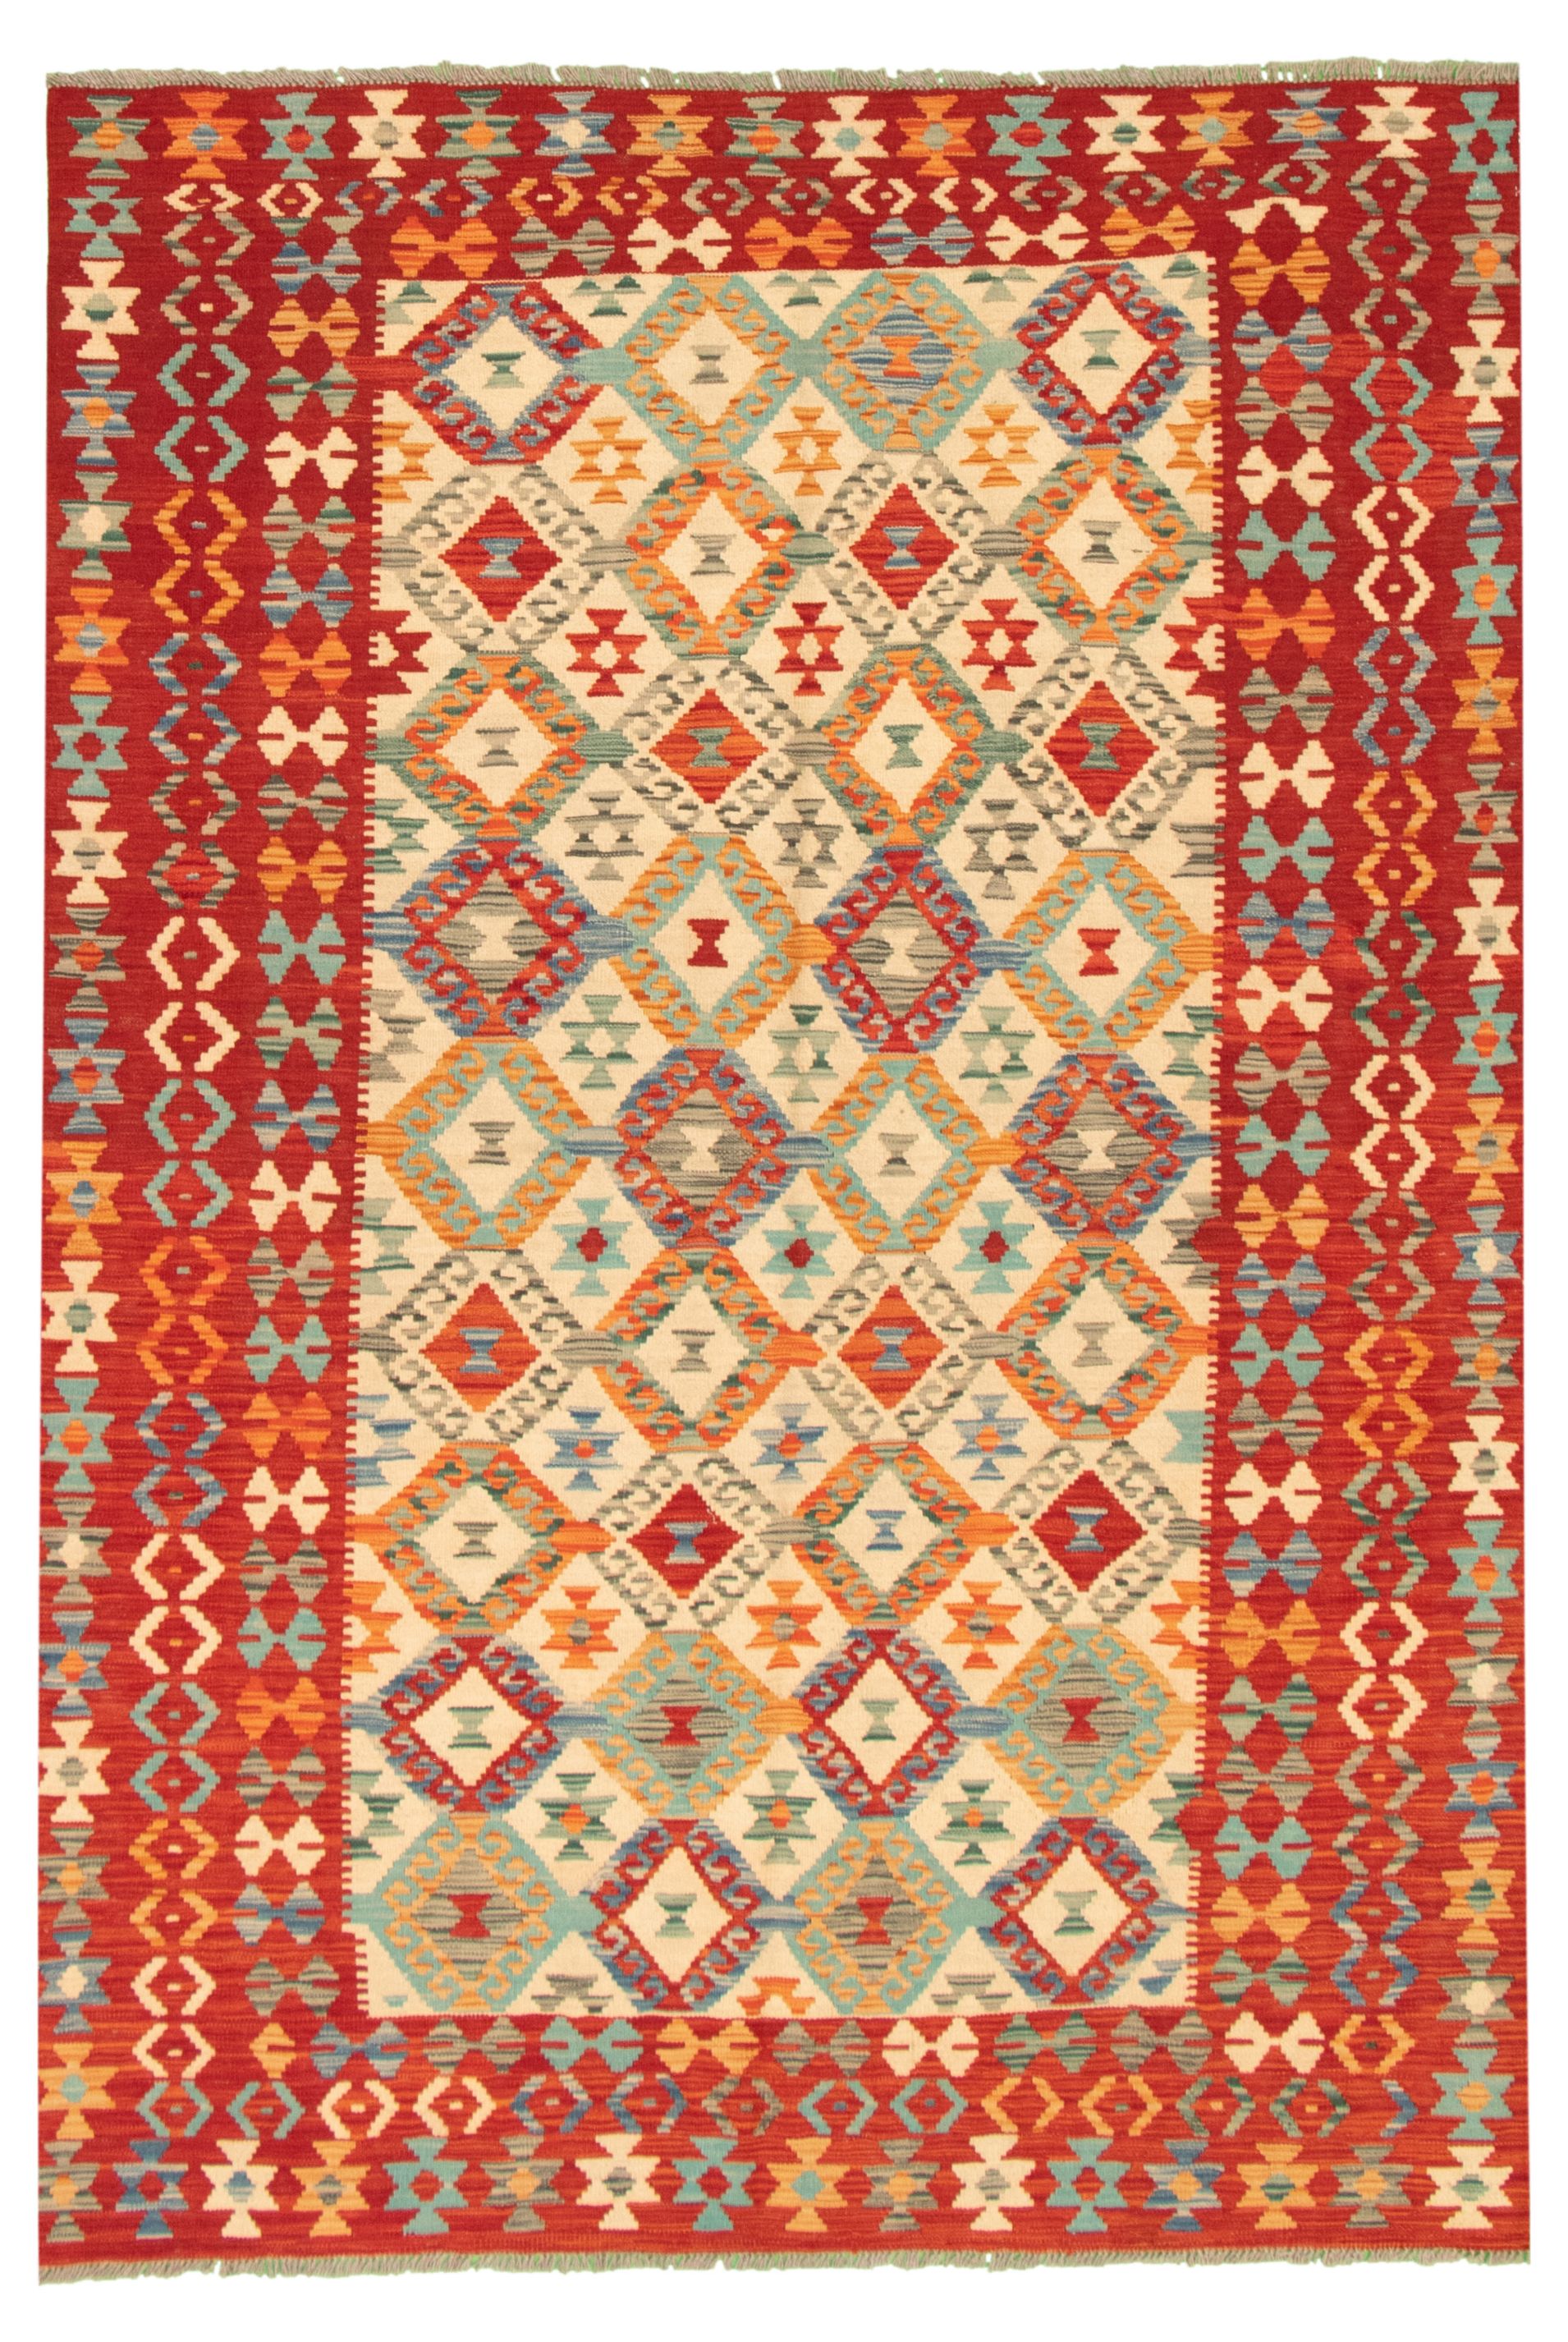 Hand woven Bold and Colorful  Dark Red, Ivory Wool Kilim 5'8" x 8'3" Size: 5'8" x 8'3"  